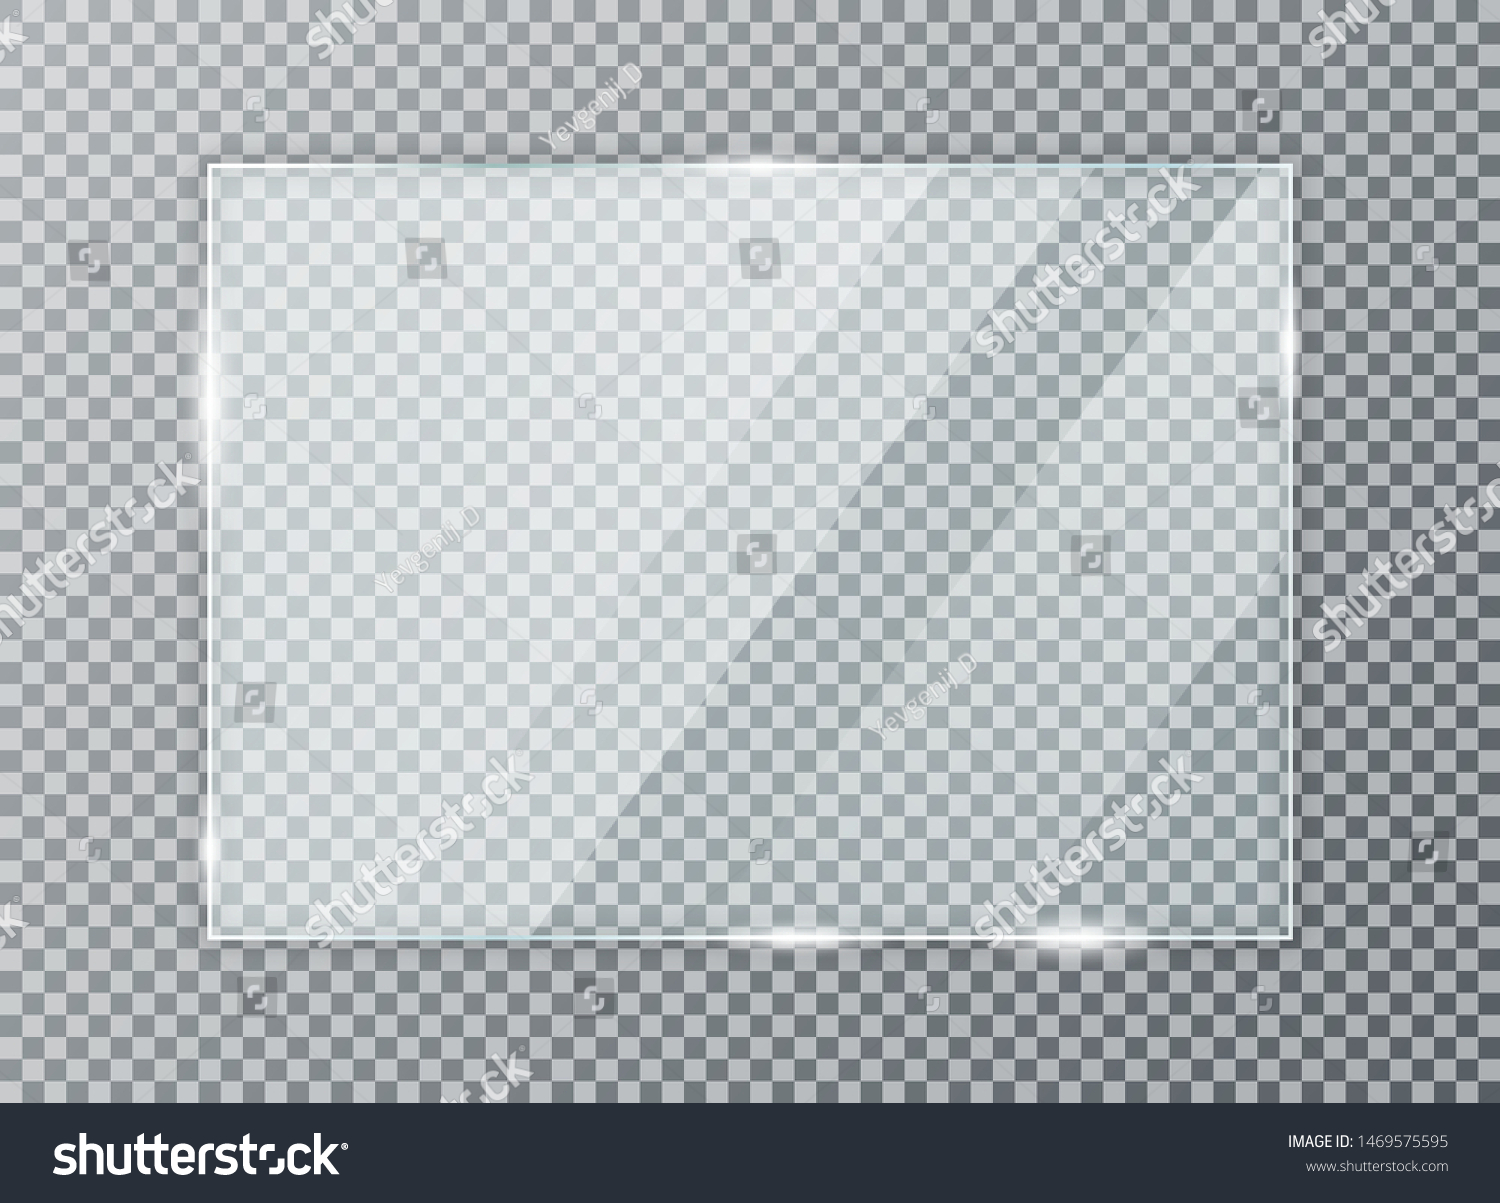 Glass plate on transparent background. Acrylic and glass texture with glares and light. Realistic transparent glass window in rectangle frame. Vector #1469575595